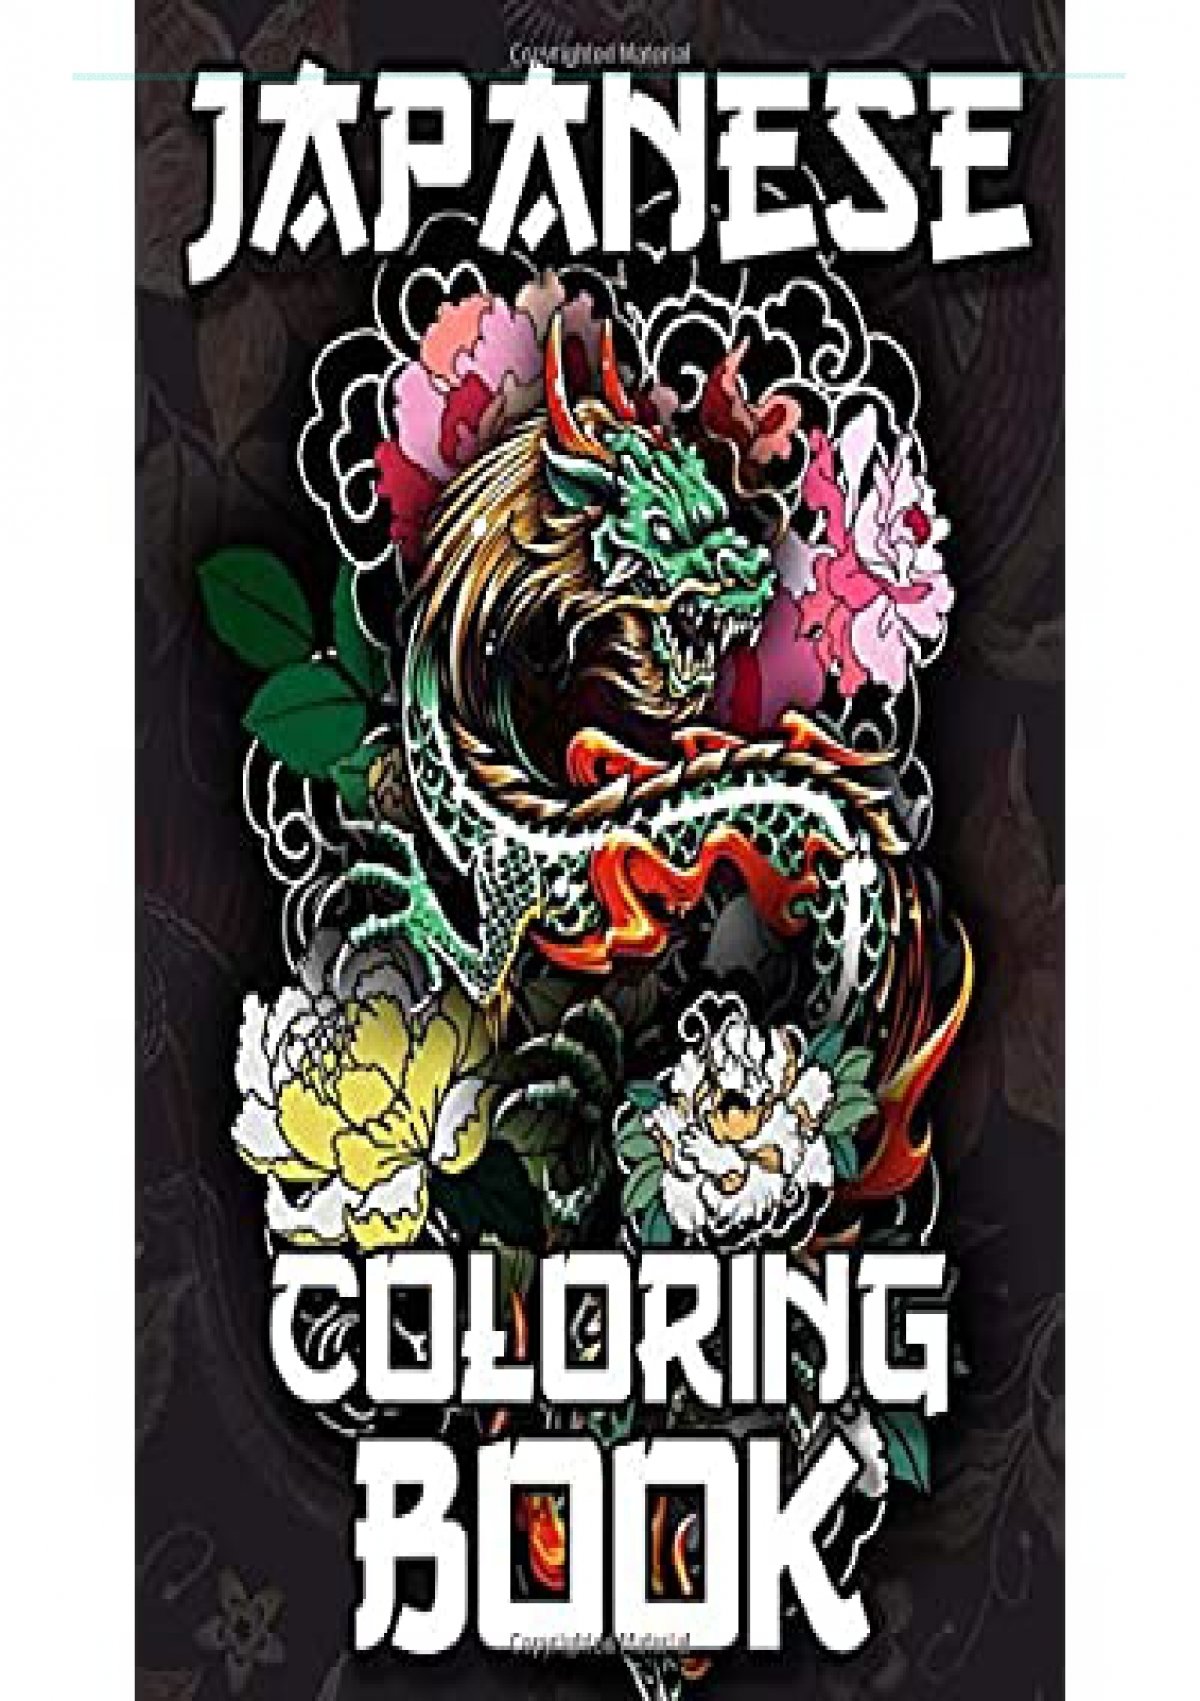 Download Pdf Japanese Coloring Book Over 300 Coloring Pages For Adults Teens With Japan Lovers Themes Such As Dragons Castle Koi Carp Fish Tattoo Designs And More Ipad